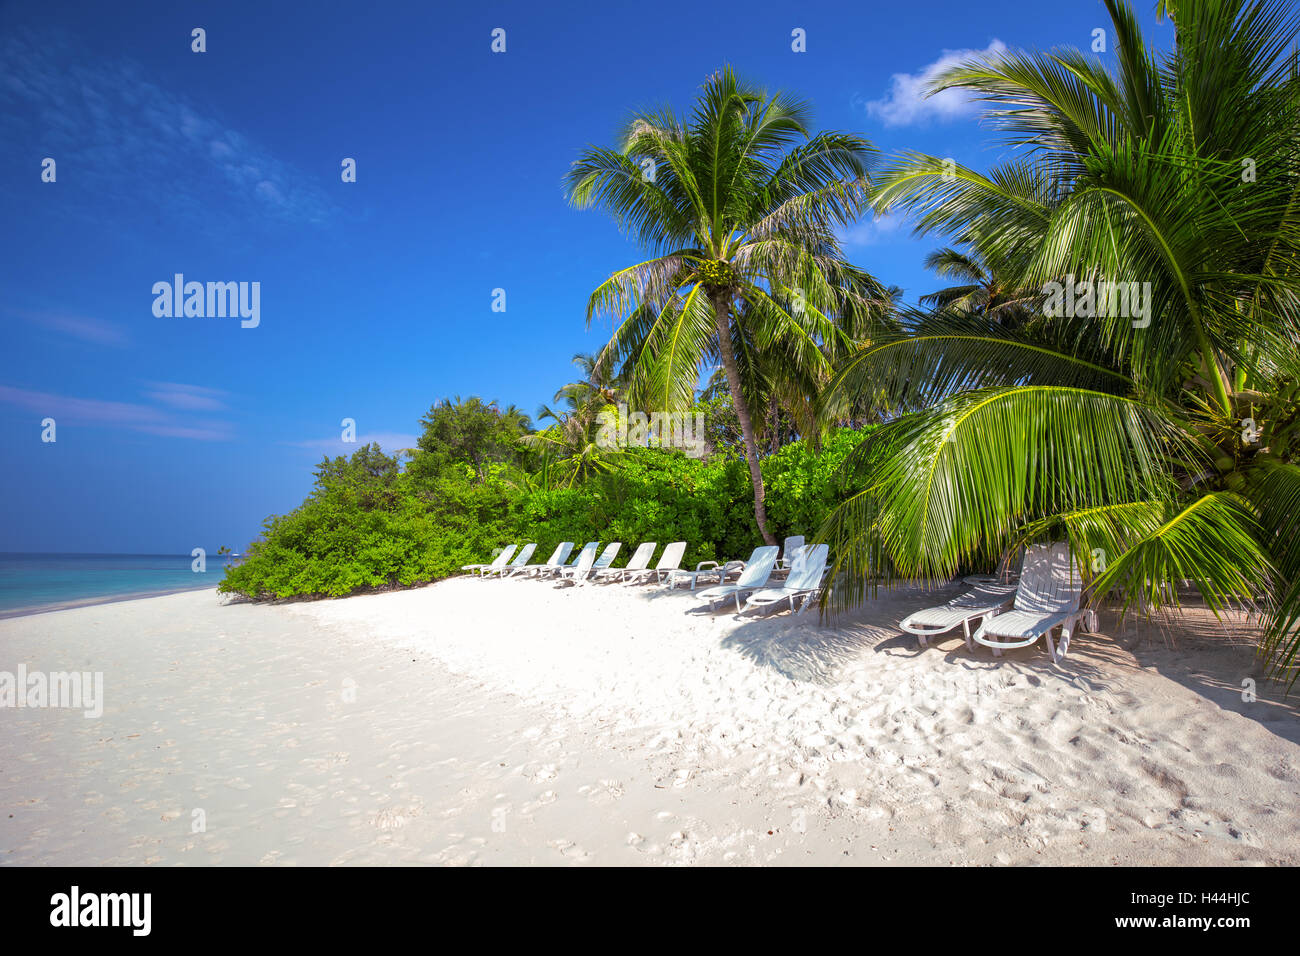 Tropical Maldives island with sandy beach, palm trees, overwater bungalows and tourquise clear water Stock Photo